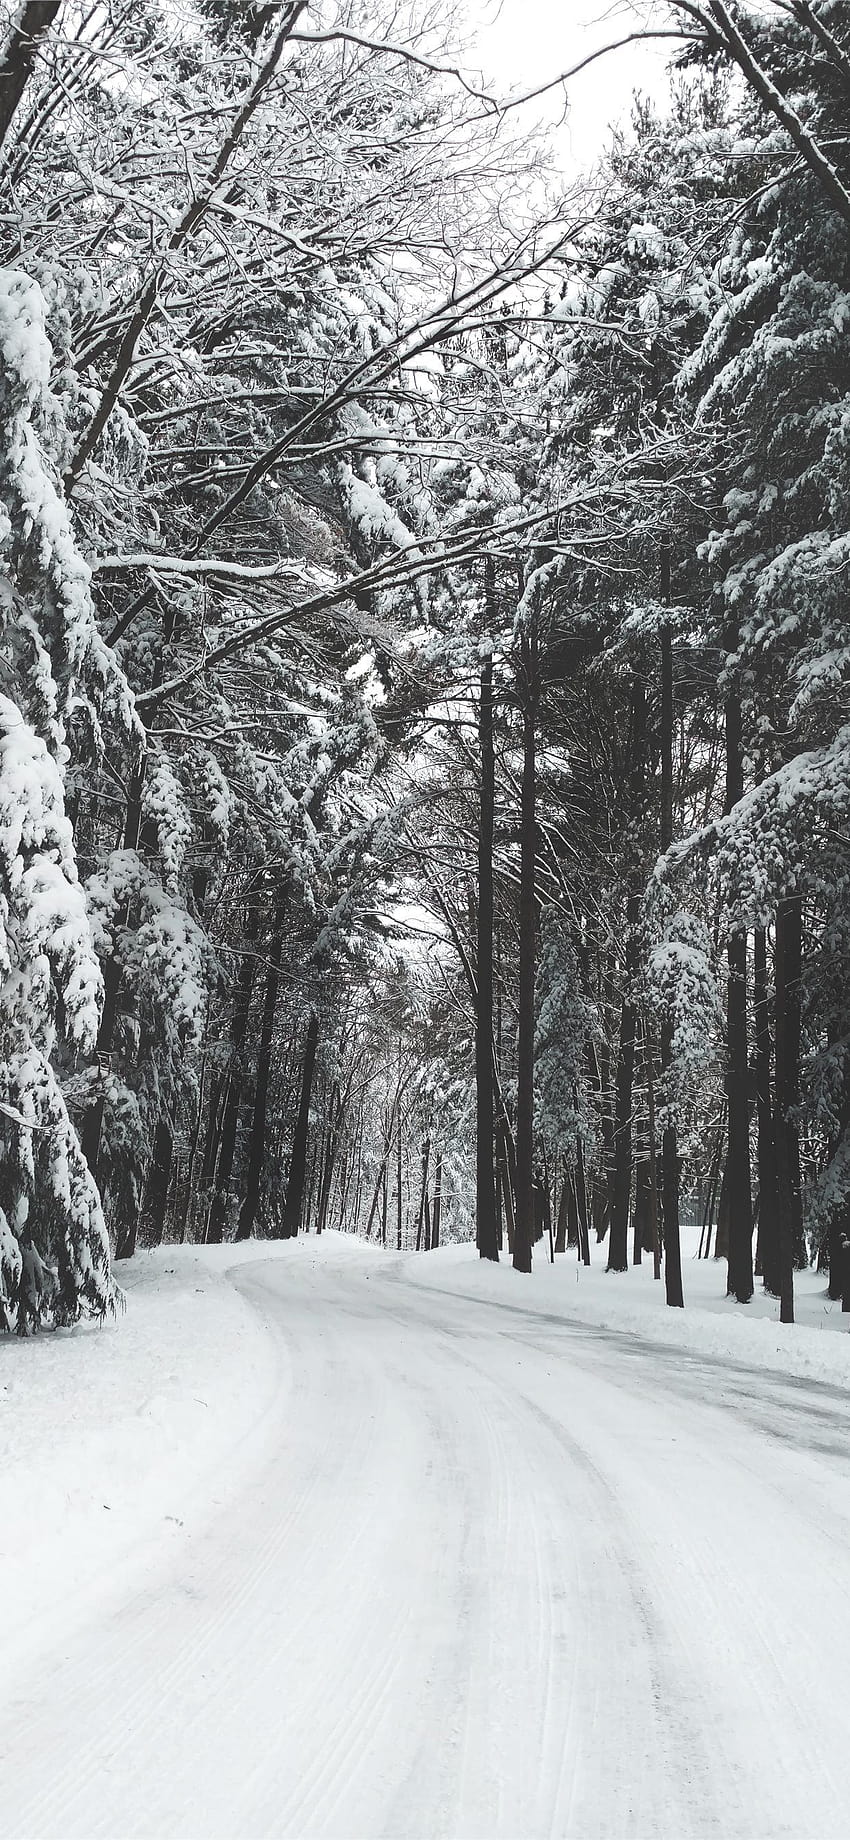 road surrounded by trees during winter iPhone X, white winter trees HD phone wallpaper